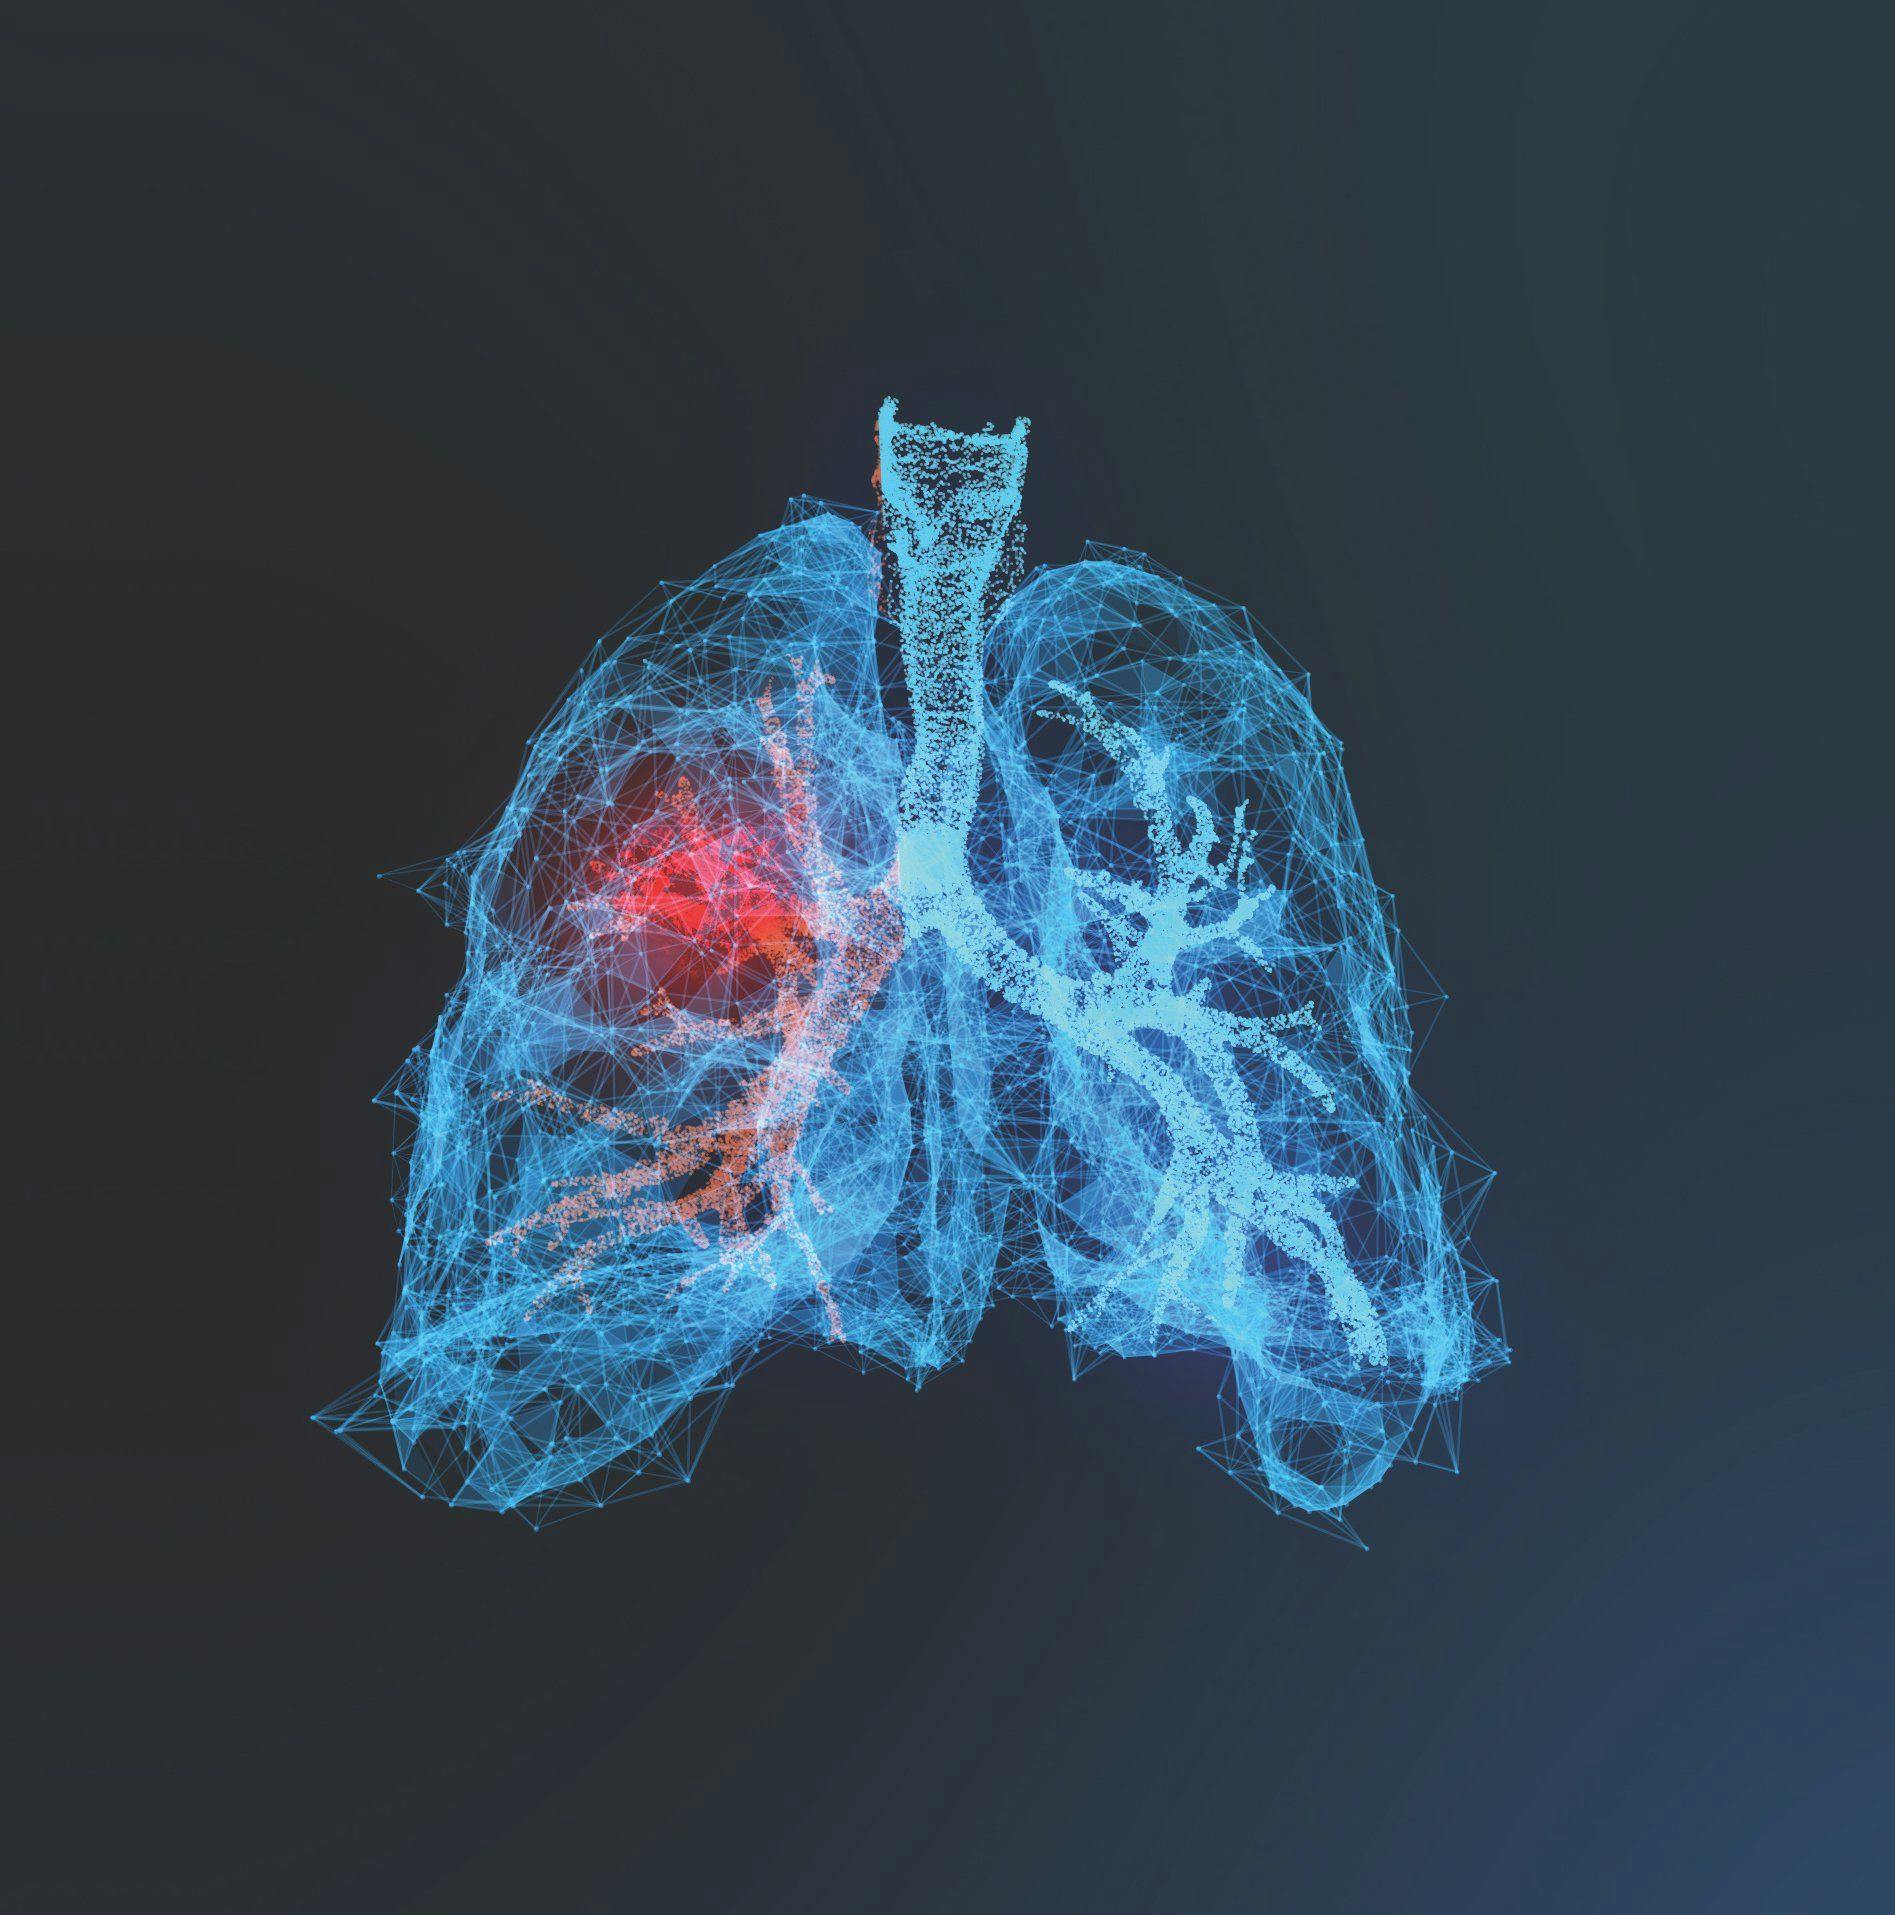 An illustration of a human lung with cancer